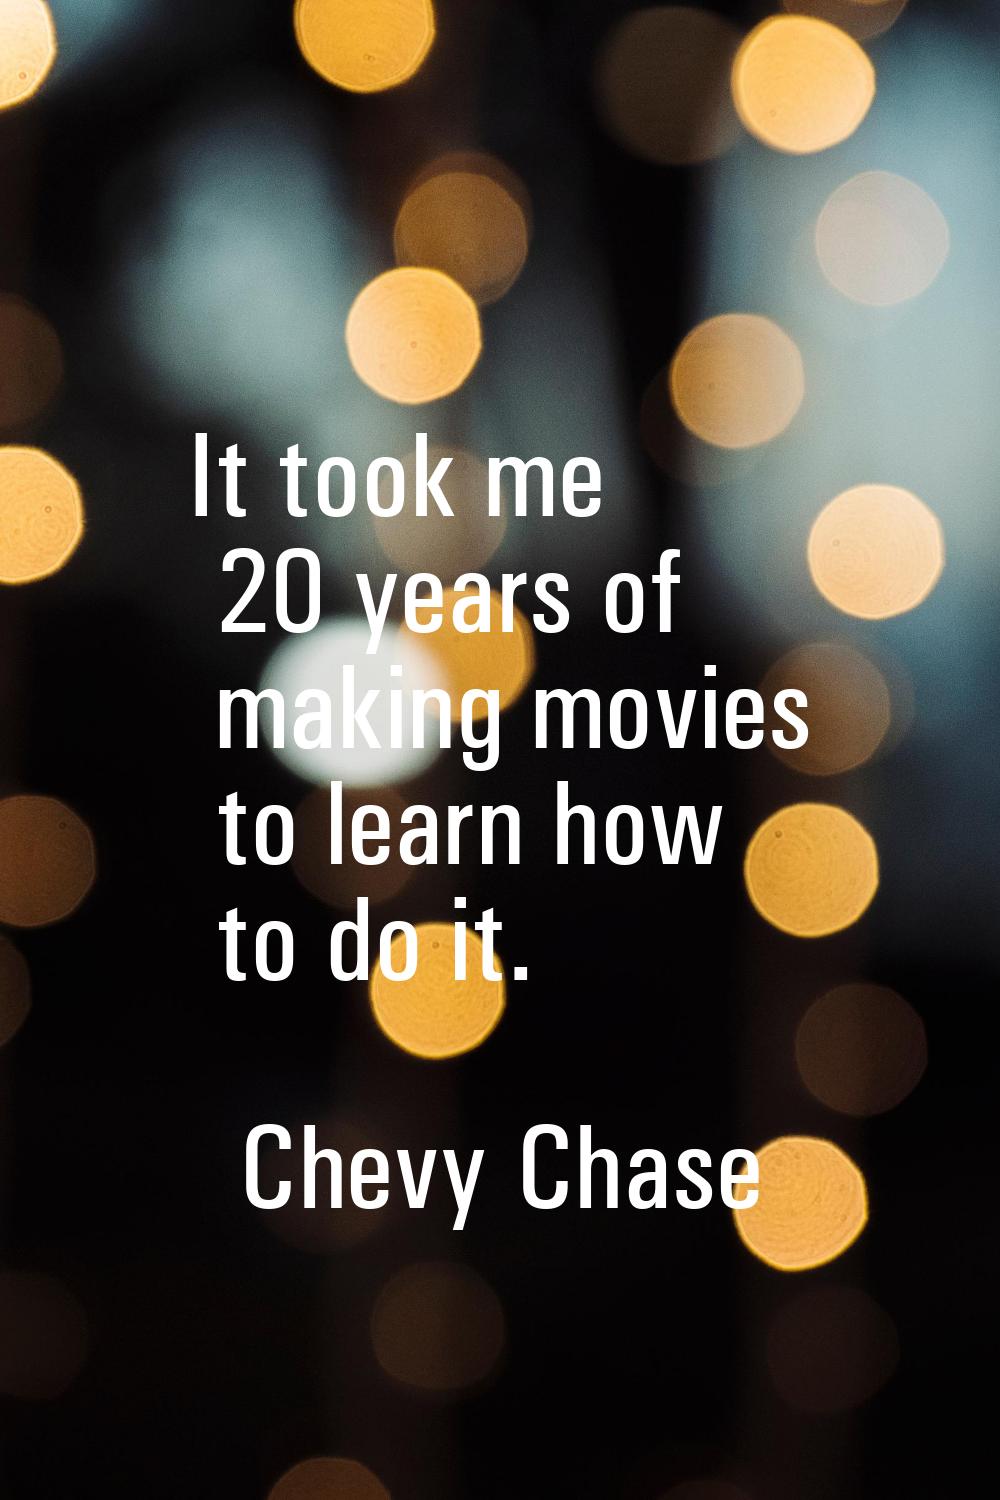 It took me 20 years of making movies to learn how to do it.